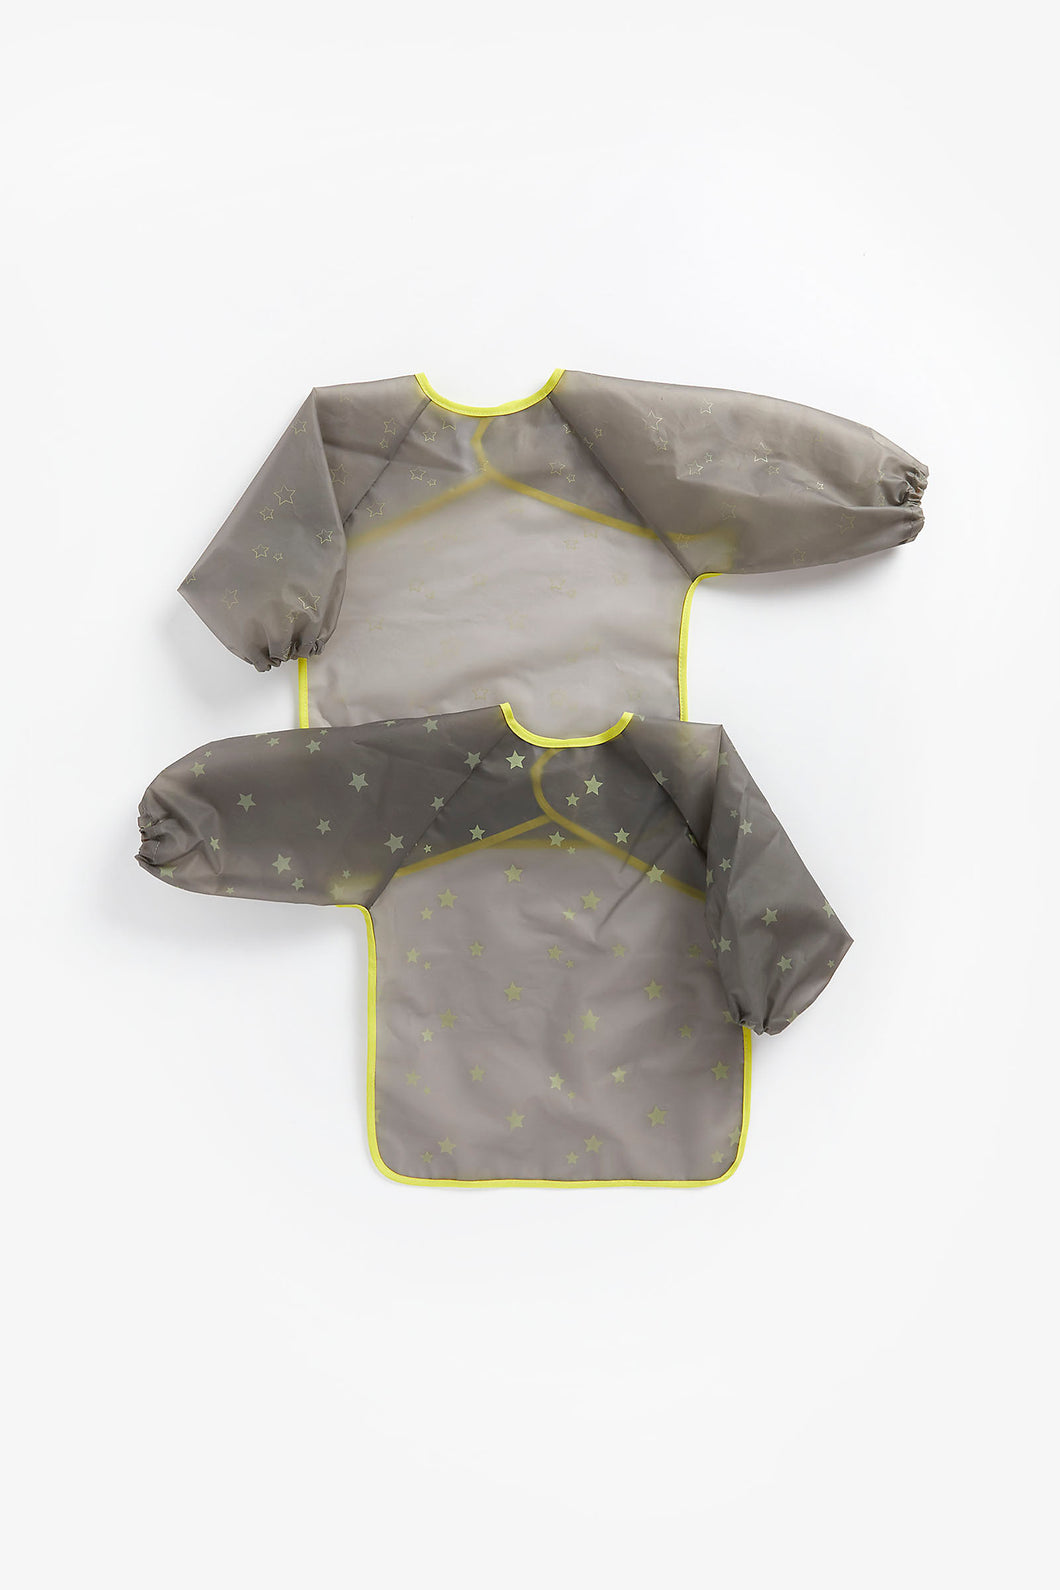 Mothercare Neon Star Coverall Bibs - 2 Pack